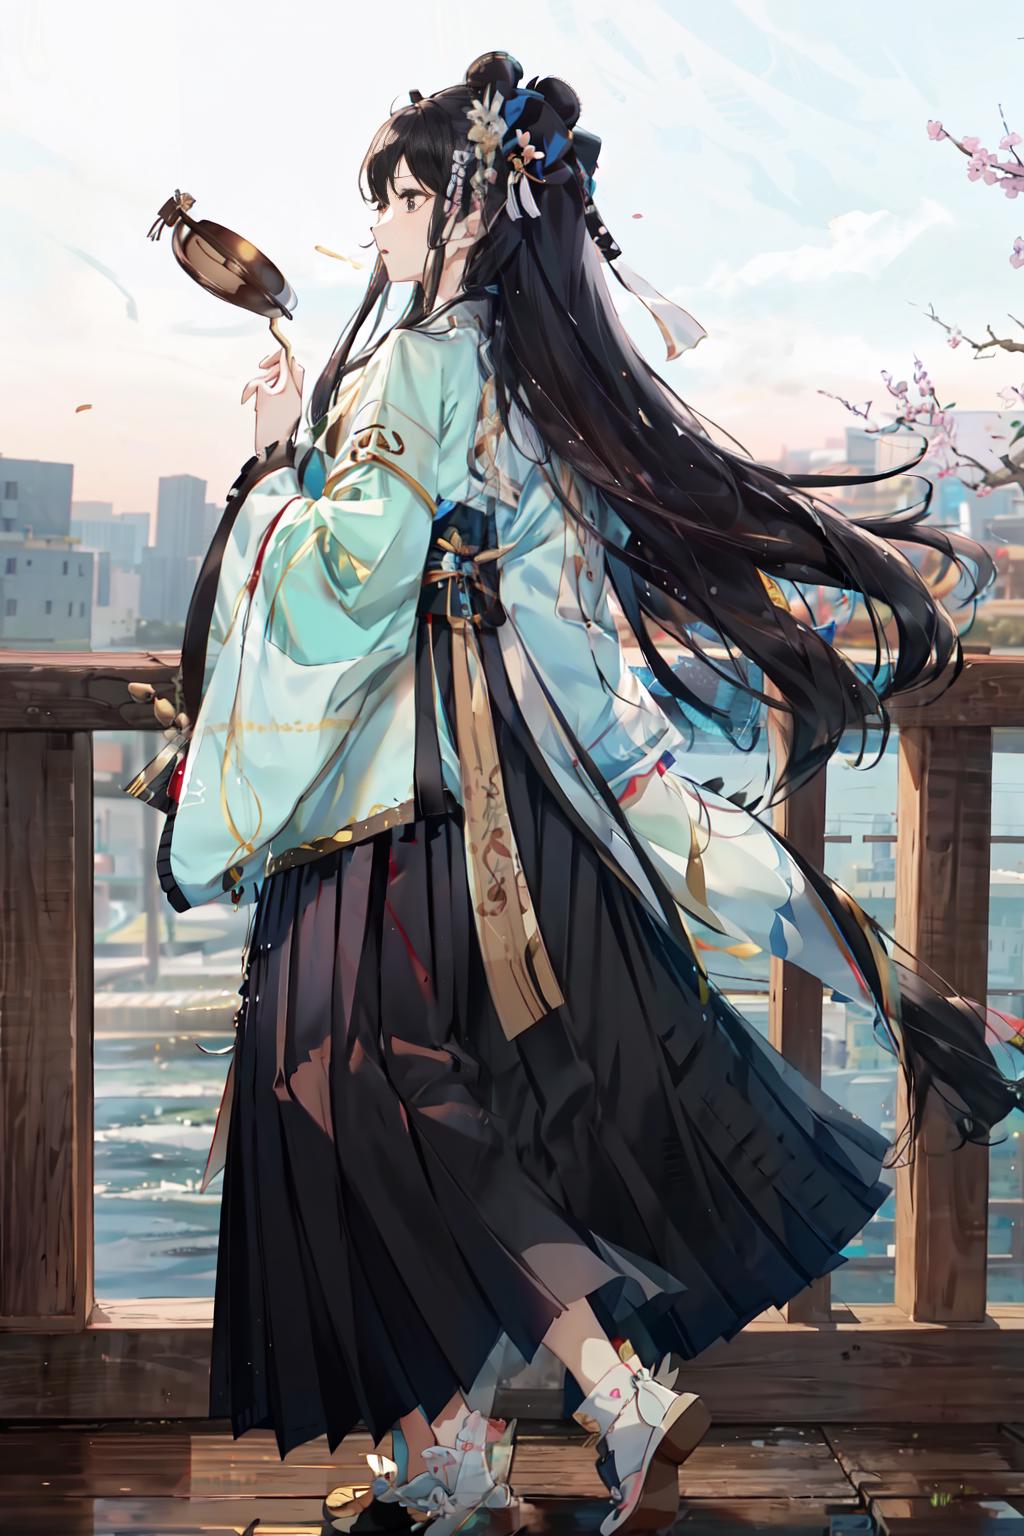 A young woman wearing a blue kimono with a black skirt and black hair is standing on a bridge overlooking the water. She is holding a fan in her hand as she enjoys the view.